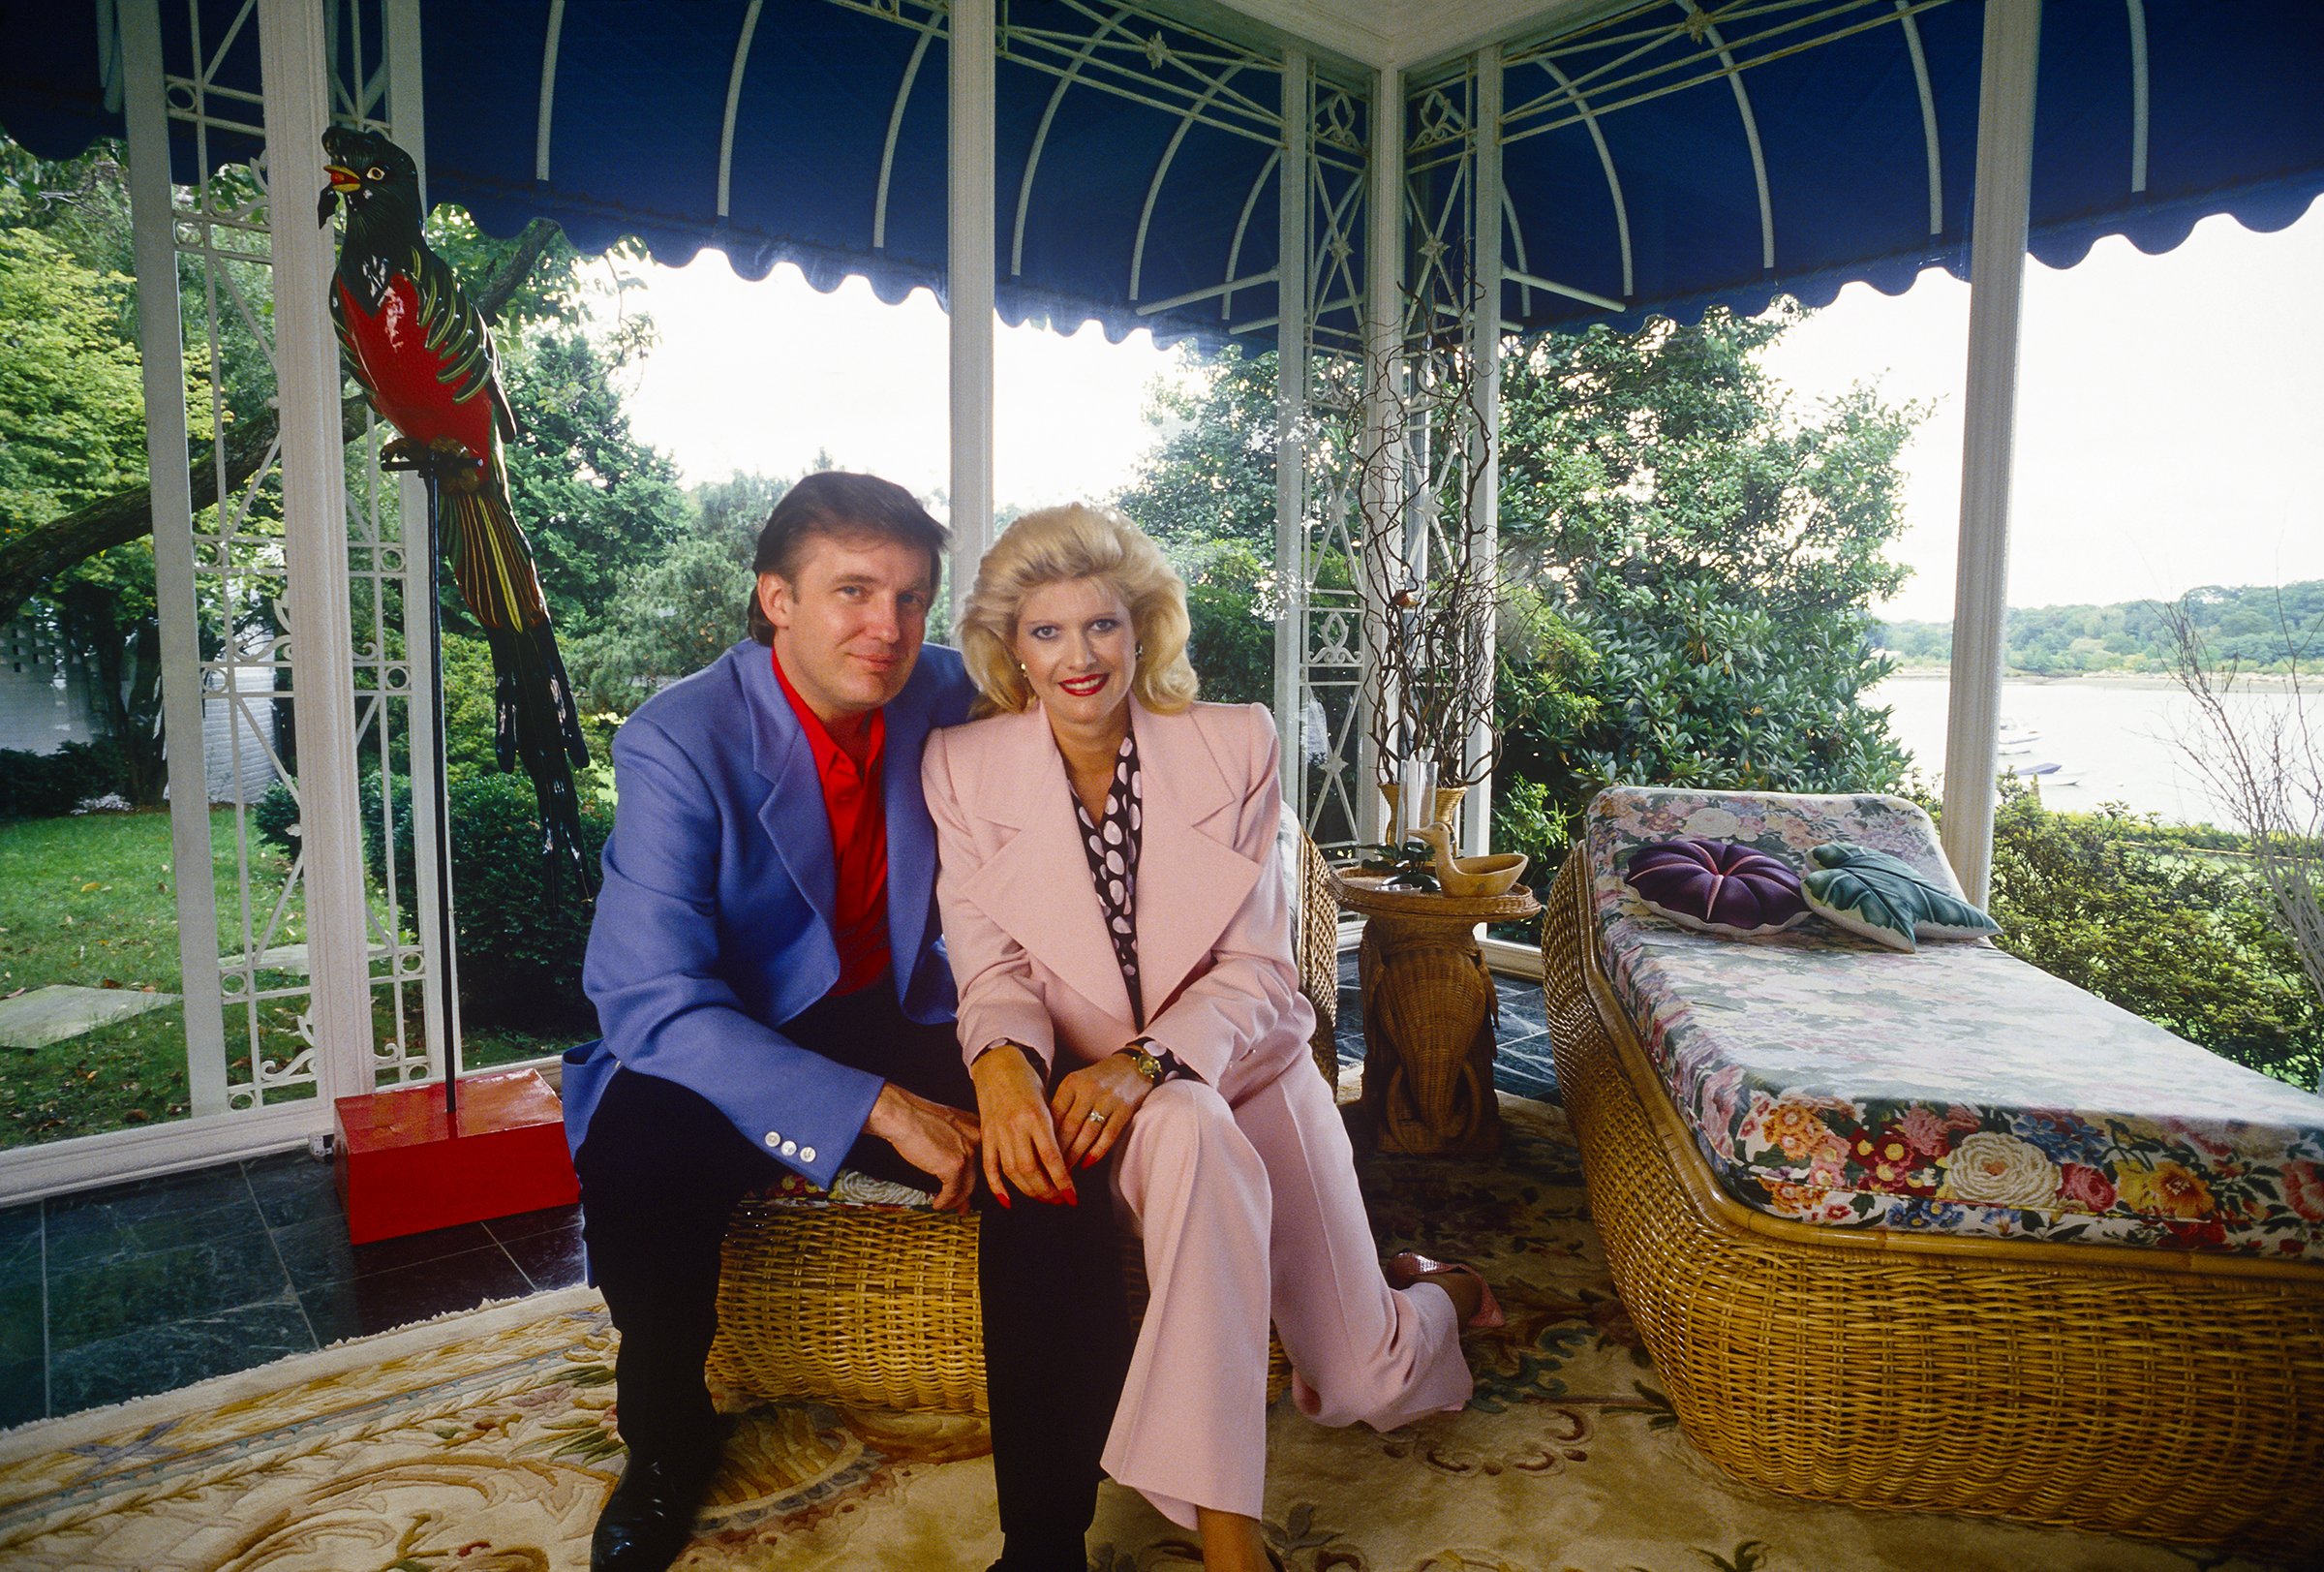 Donald Trump with first wife, Ivana, at their Greenwich, Ct. mansion in 1987. | Source: Getty Images